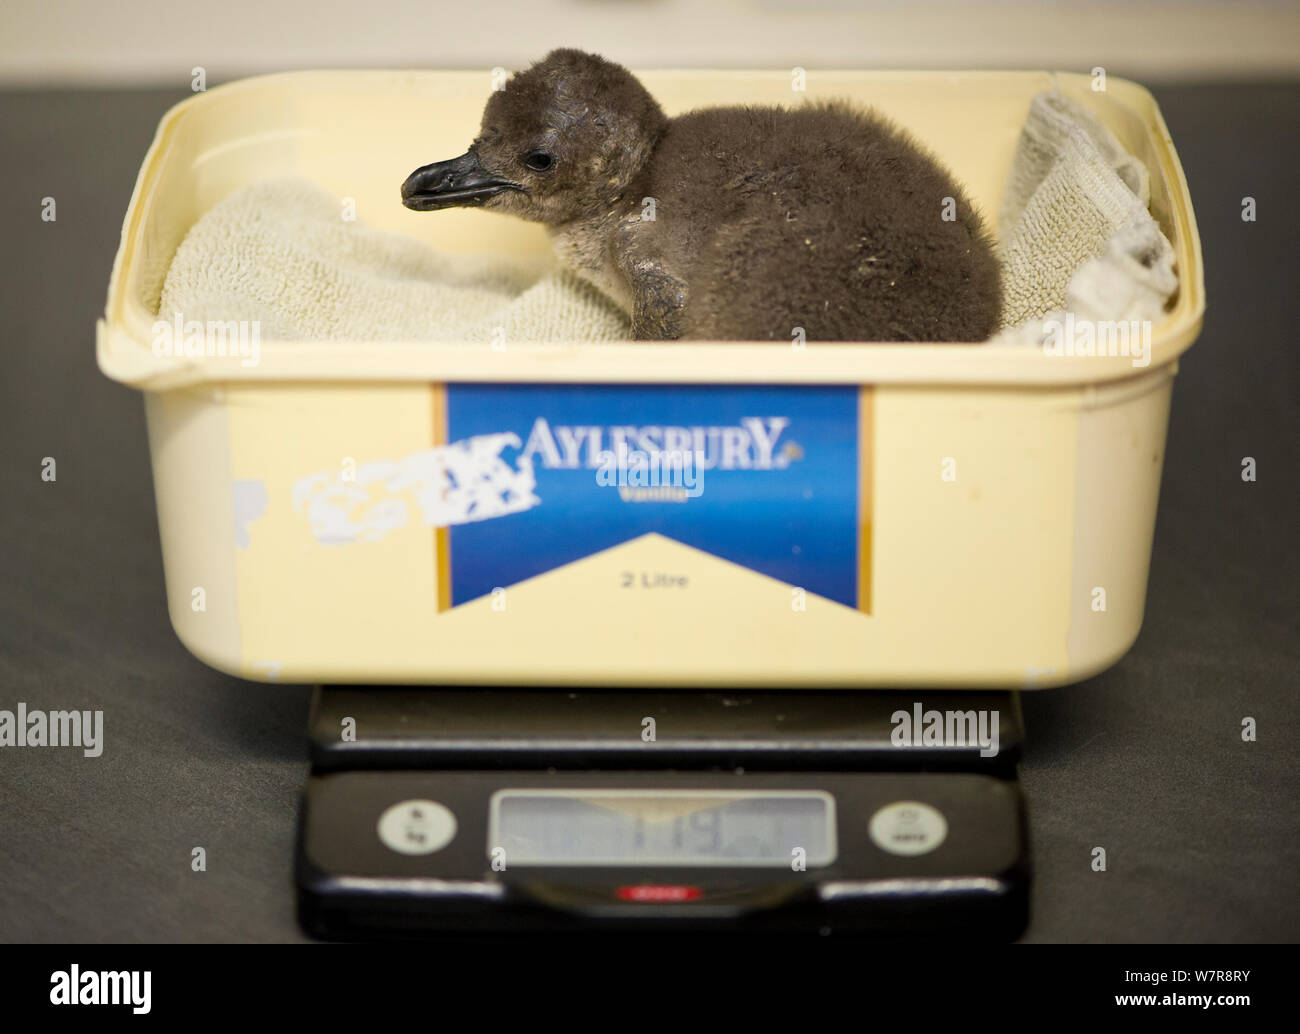 African penguin (Spheniscus demersus) being weighed, part of Chick Bolstering Project, Southern African Foundation for the Conservation of Coastal Birds (SANCCOB), South Africa May 2012 Stock Photo